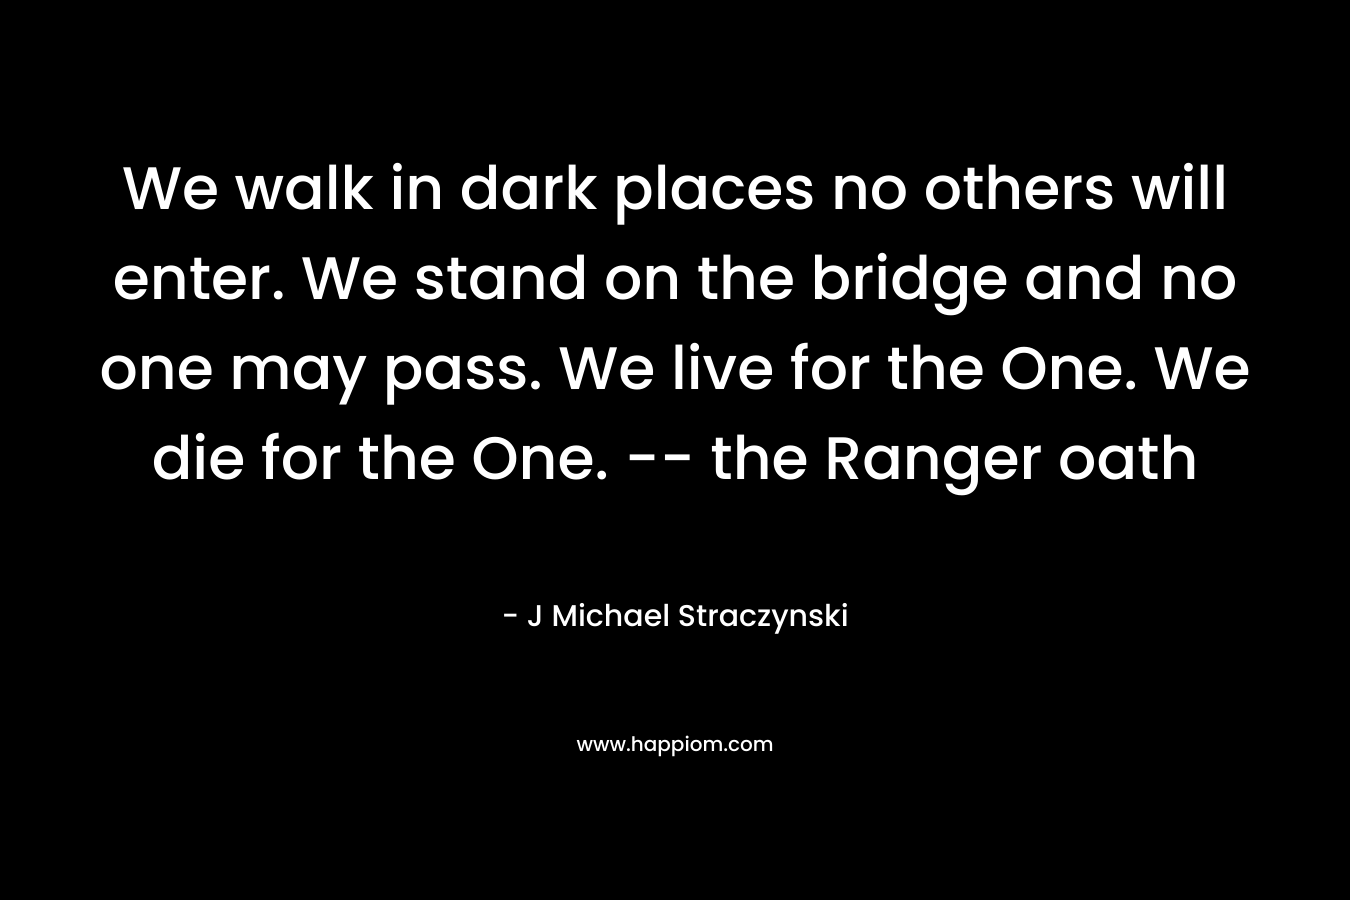 We walk in dark places no others will enter. We stand on the bridge and no one may pass. We live for the One. We die for the One. -- the Ranger oath